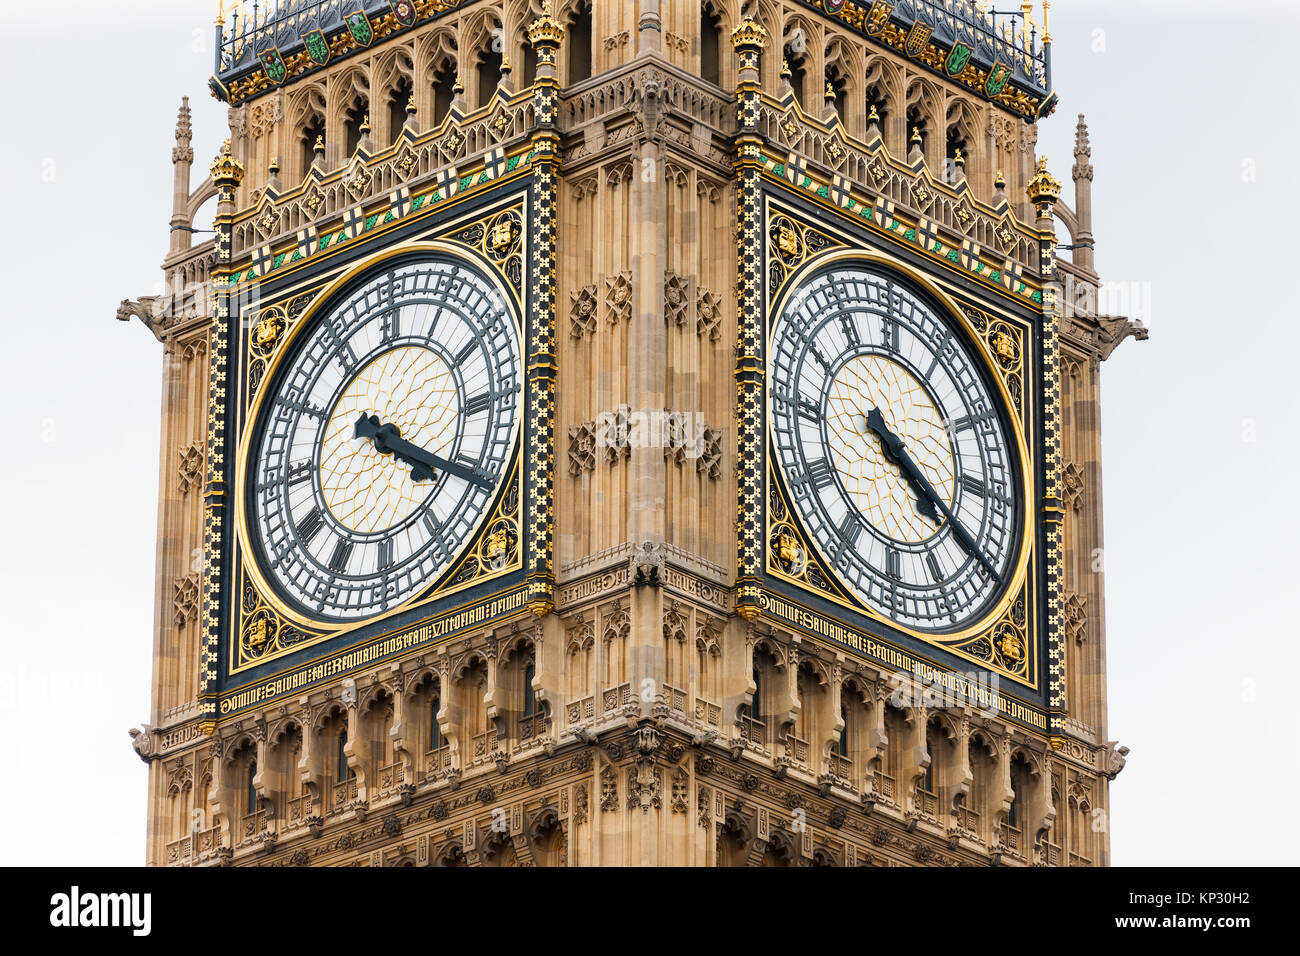 Big Ben Clock Tower, London, England, closeup of two of the four clock faces on the icon gothic landmark Stock Photo